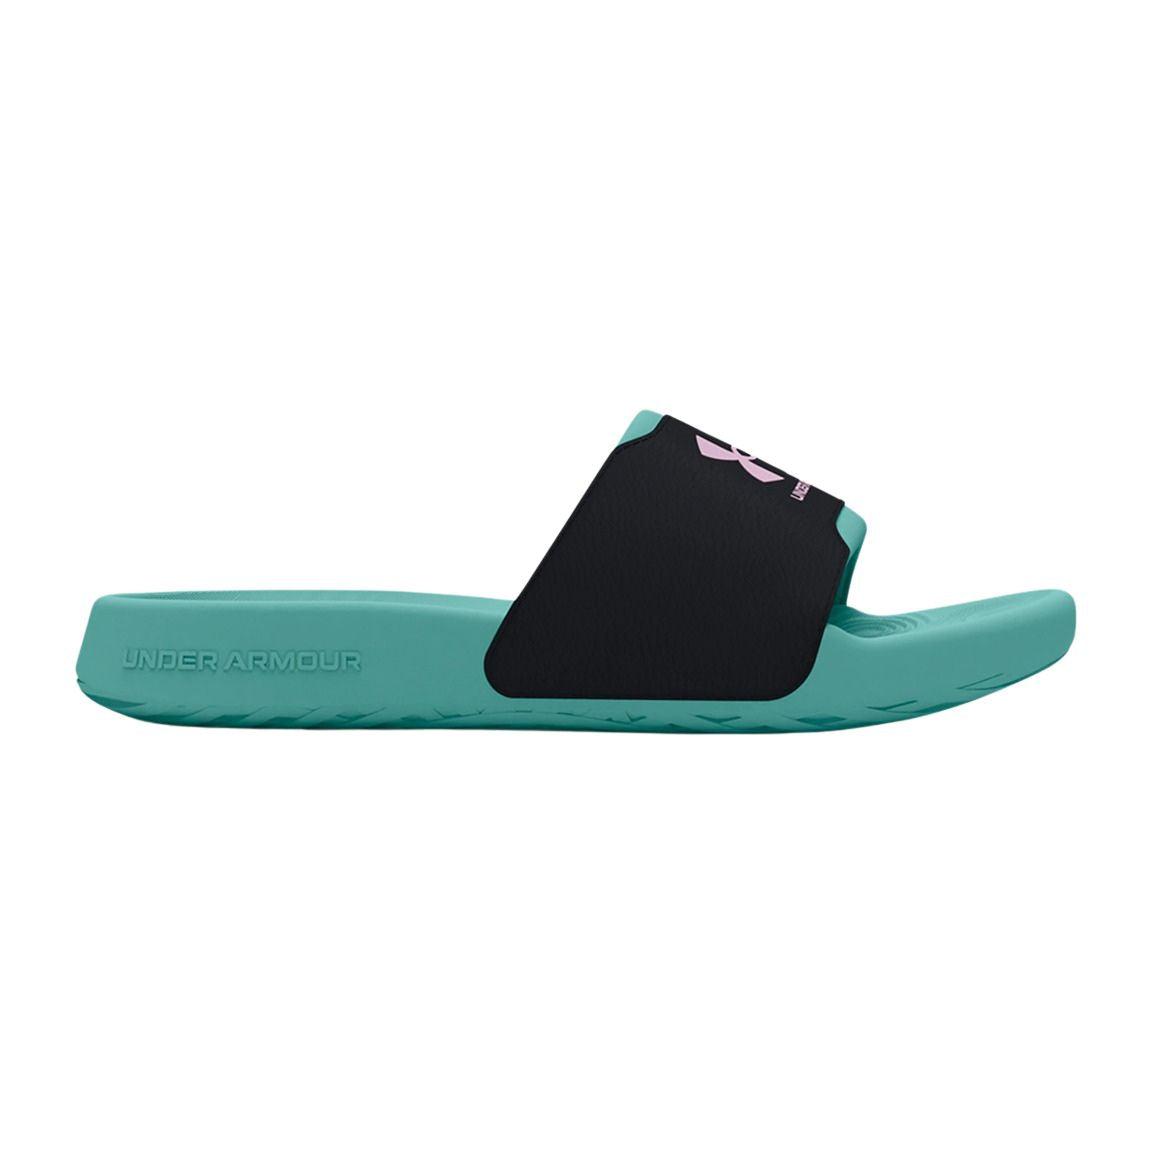 Under Armour Ignite Select Slides - Girls